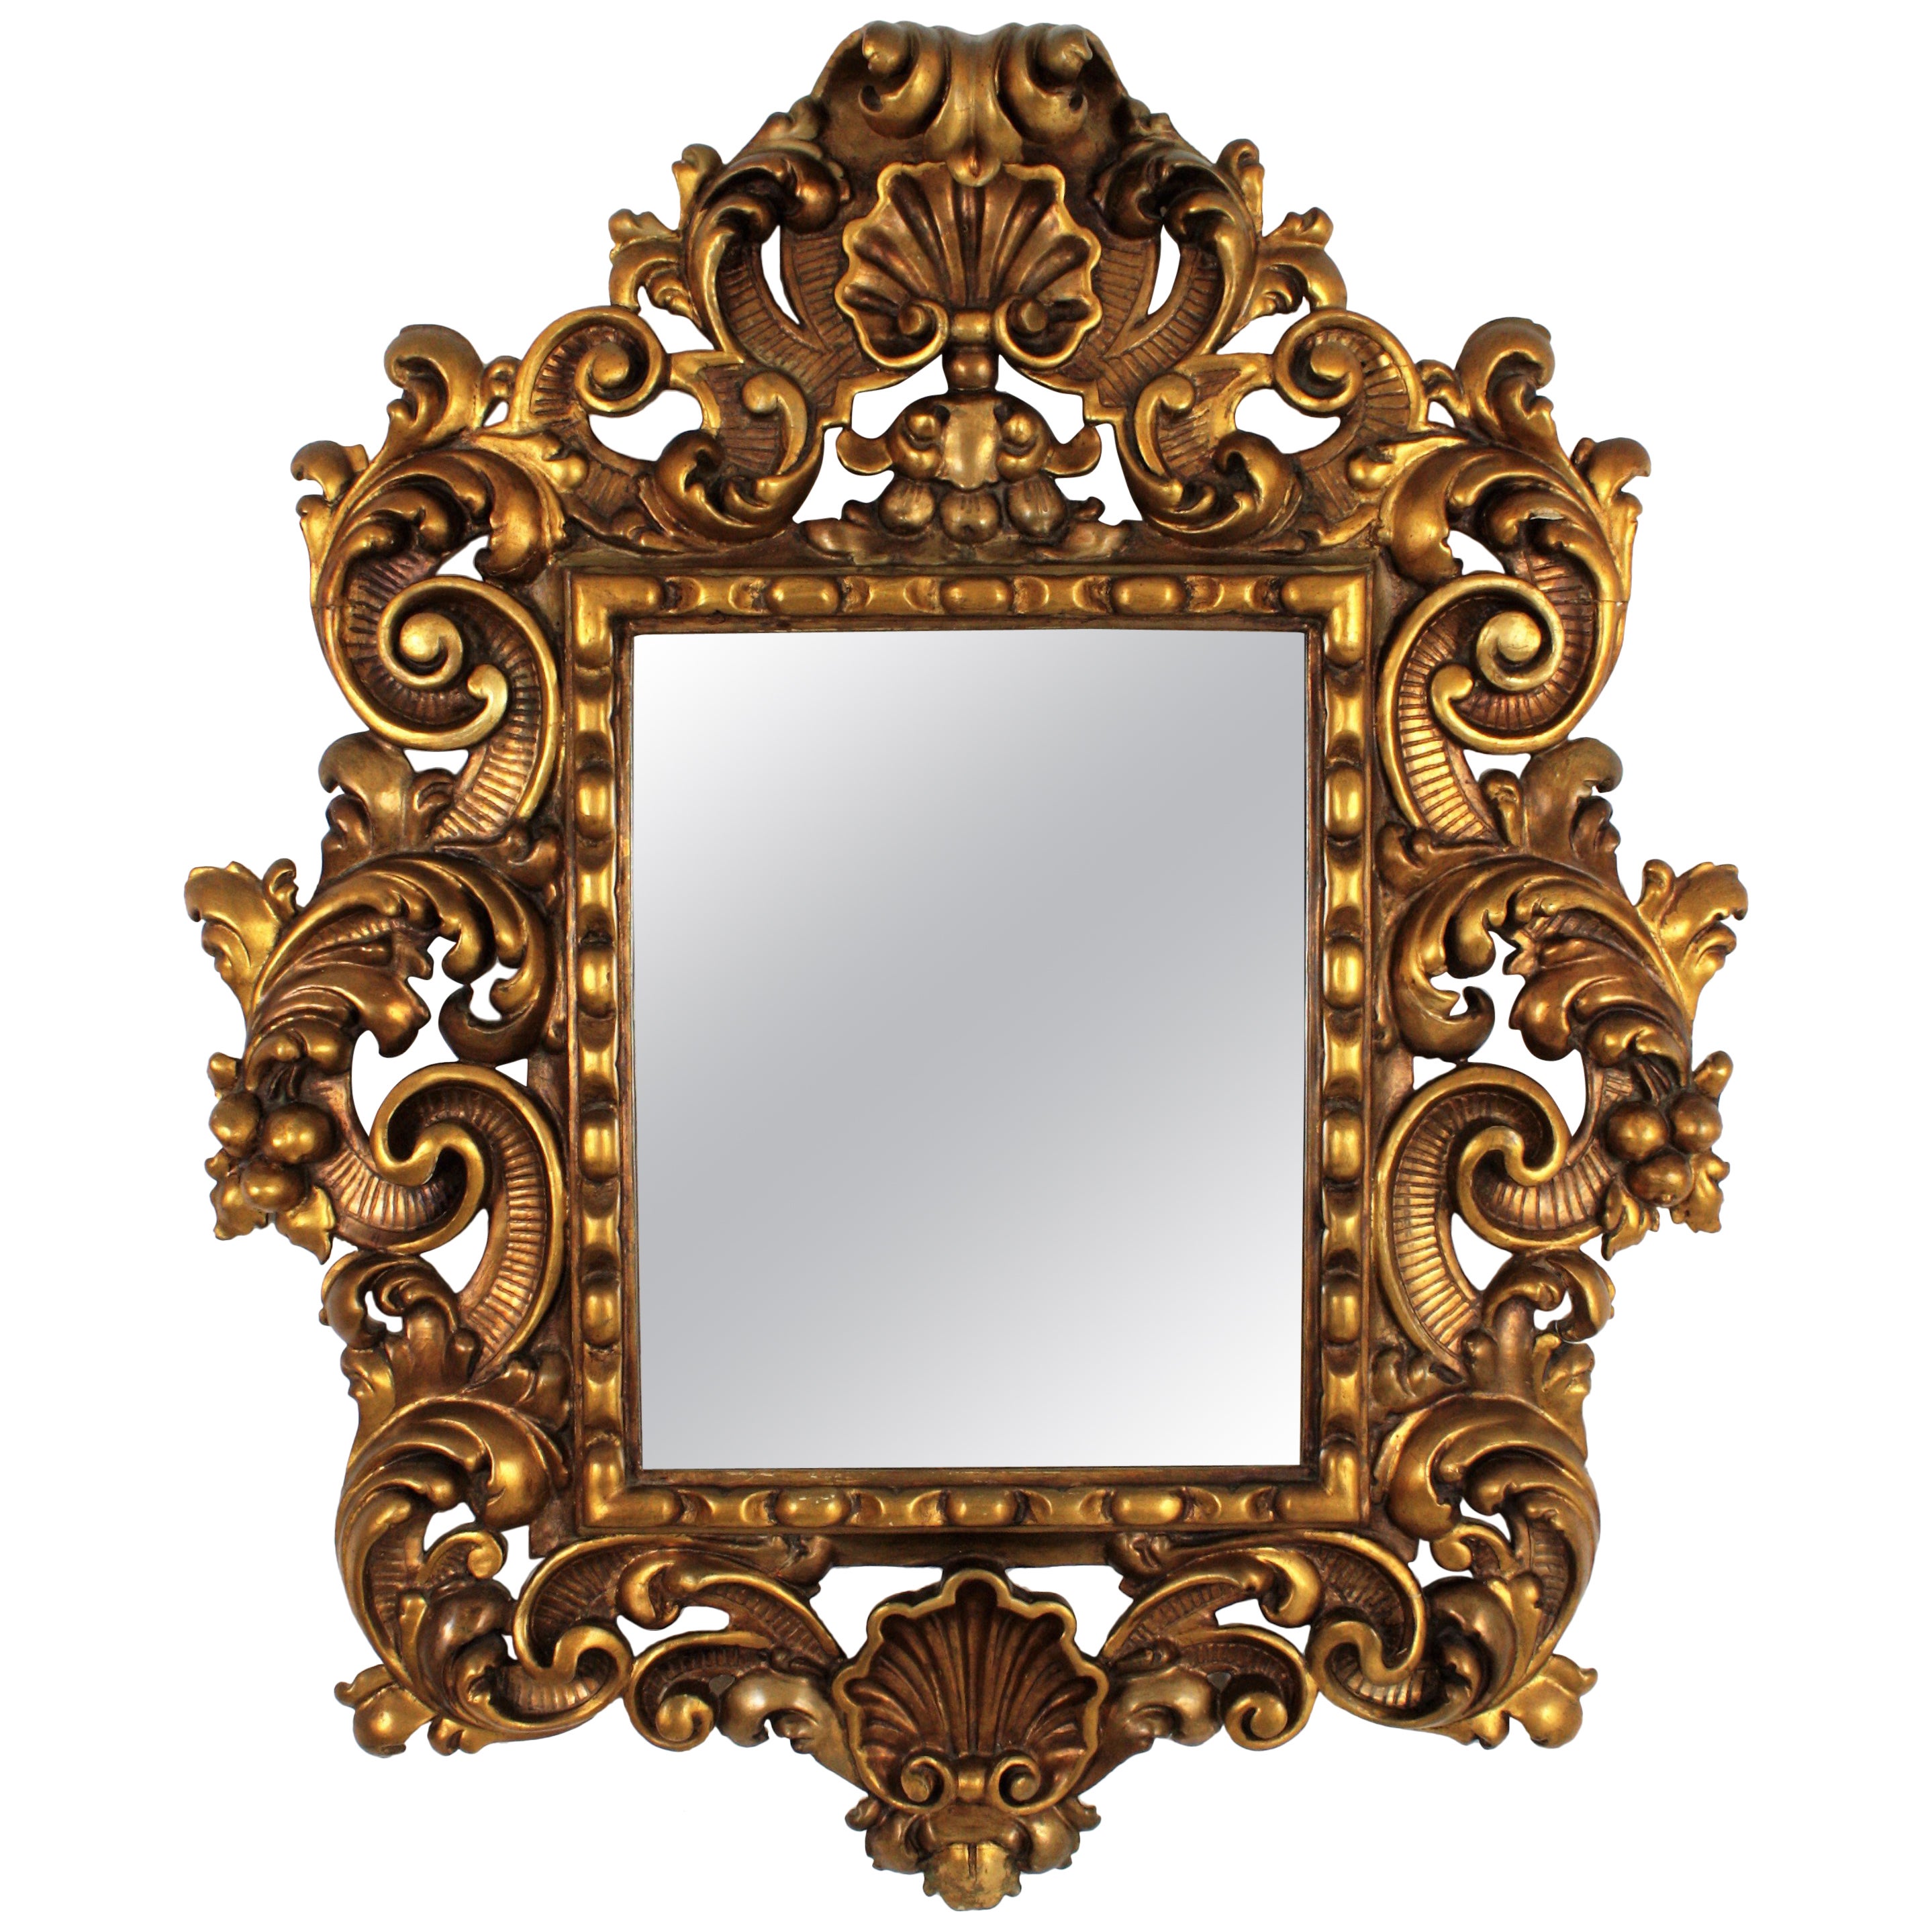 A gorgeous Spanish Rococo style mirror finely carved with beautiful naturalistic motifs. Spain, 1930s 
One of a kind spanish carved wall mirror
Gold leaf giltwood with an excellent aged patina. This exquisite frame has a richly decoration with